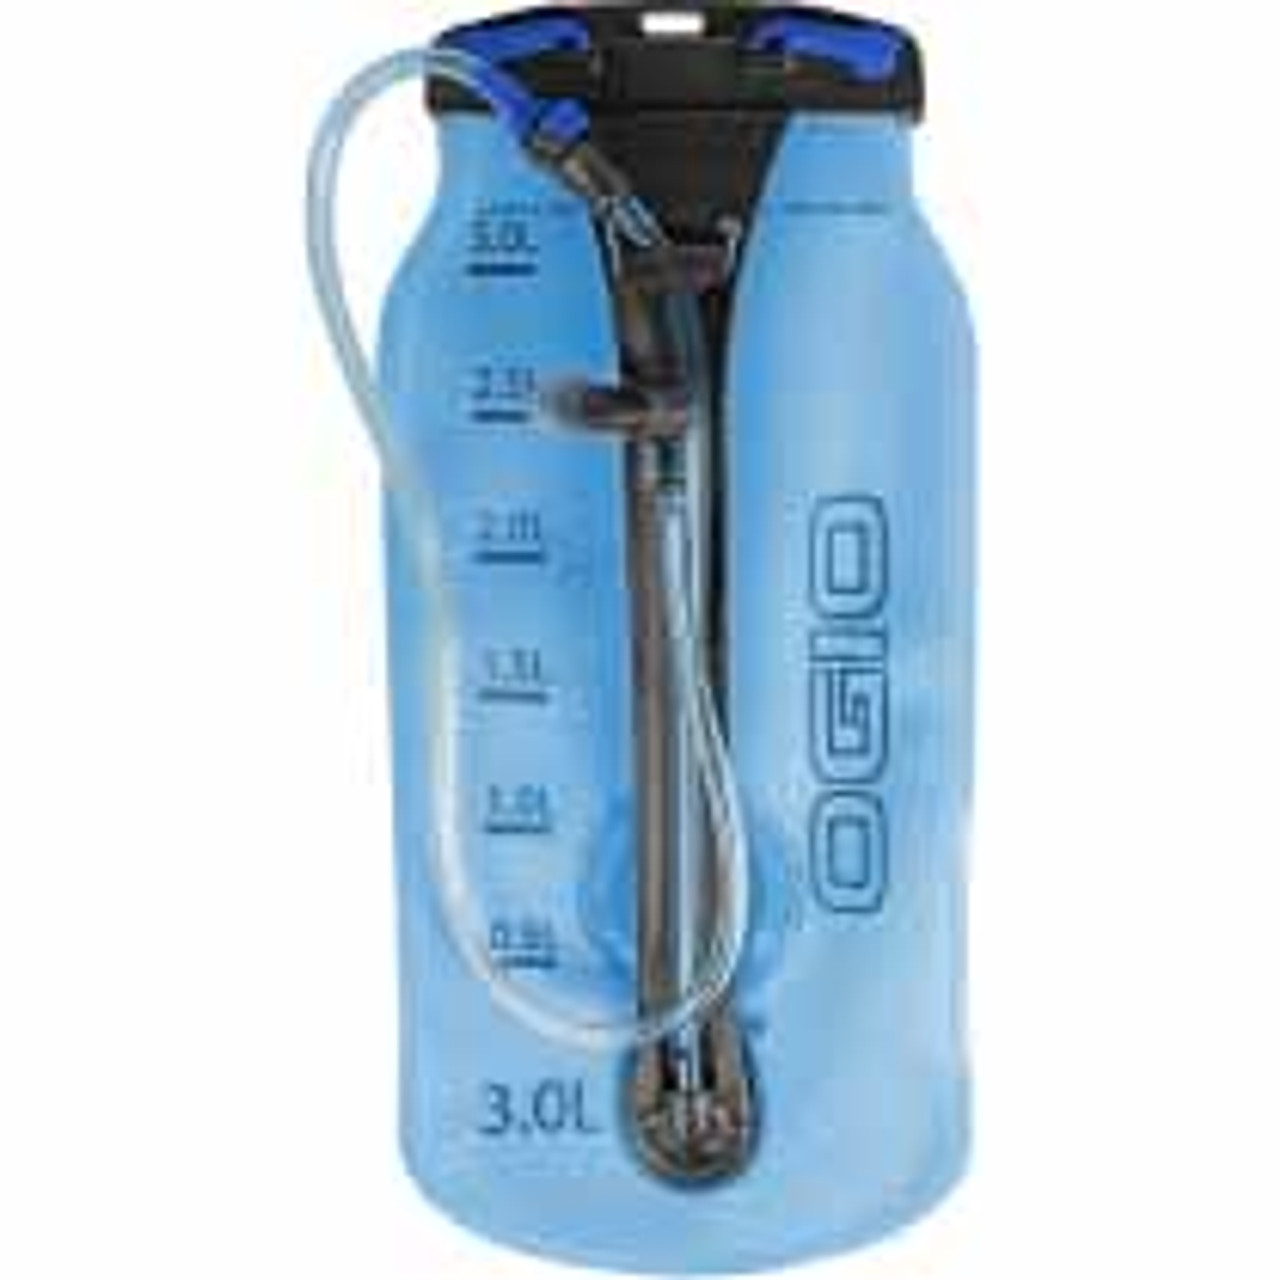 Ogio Atlas 3L hydration pack, in black, comes with a 3L bladder